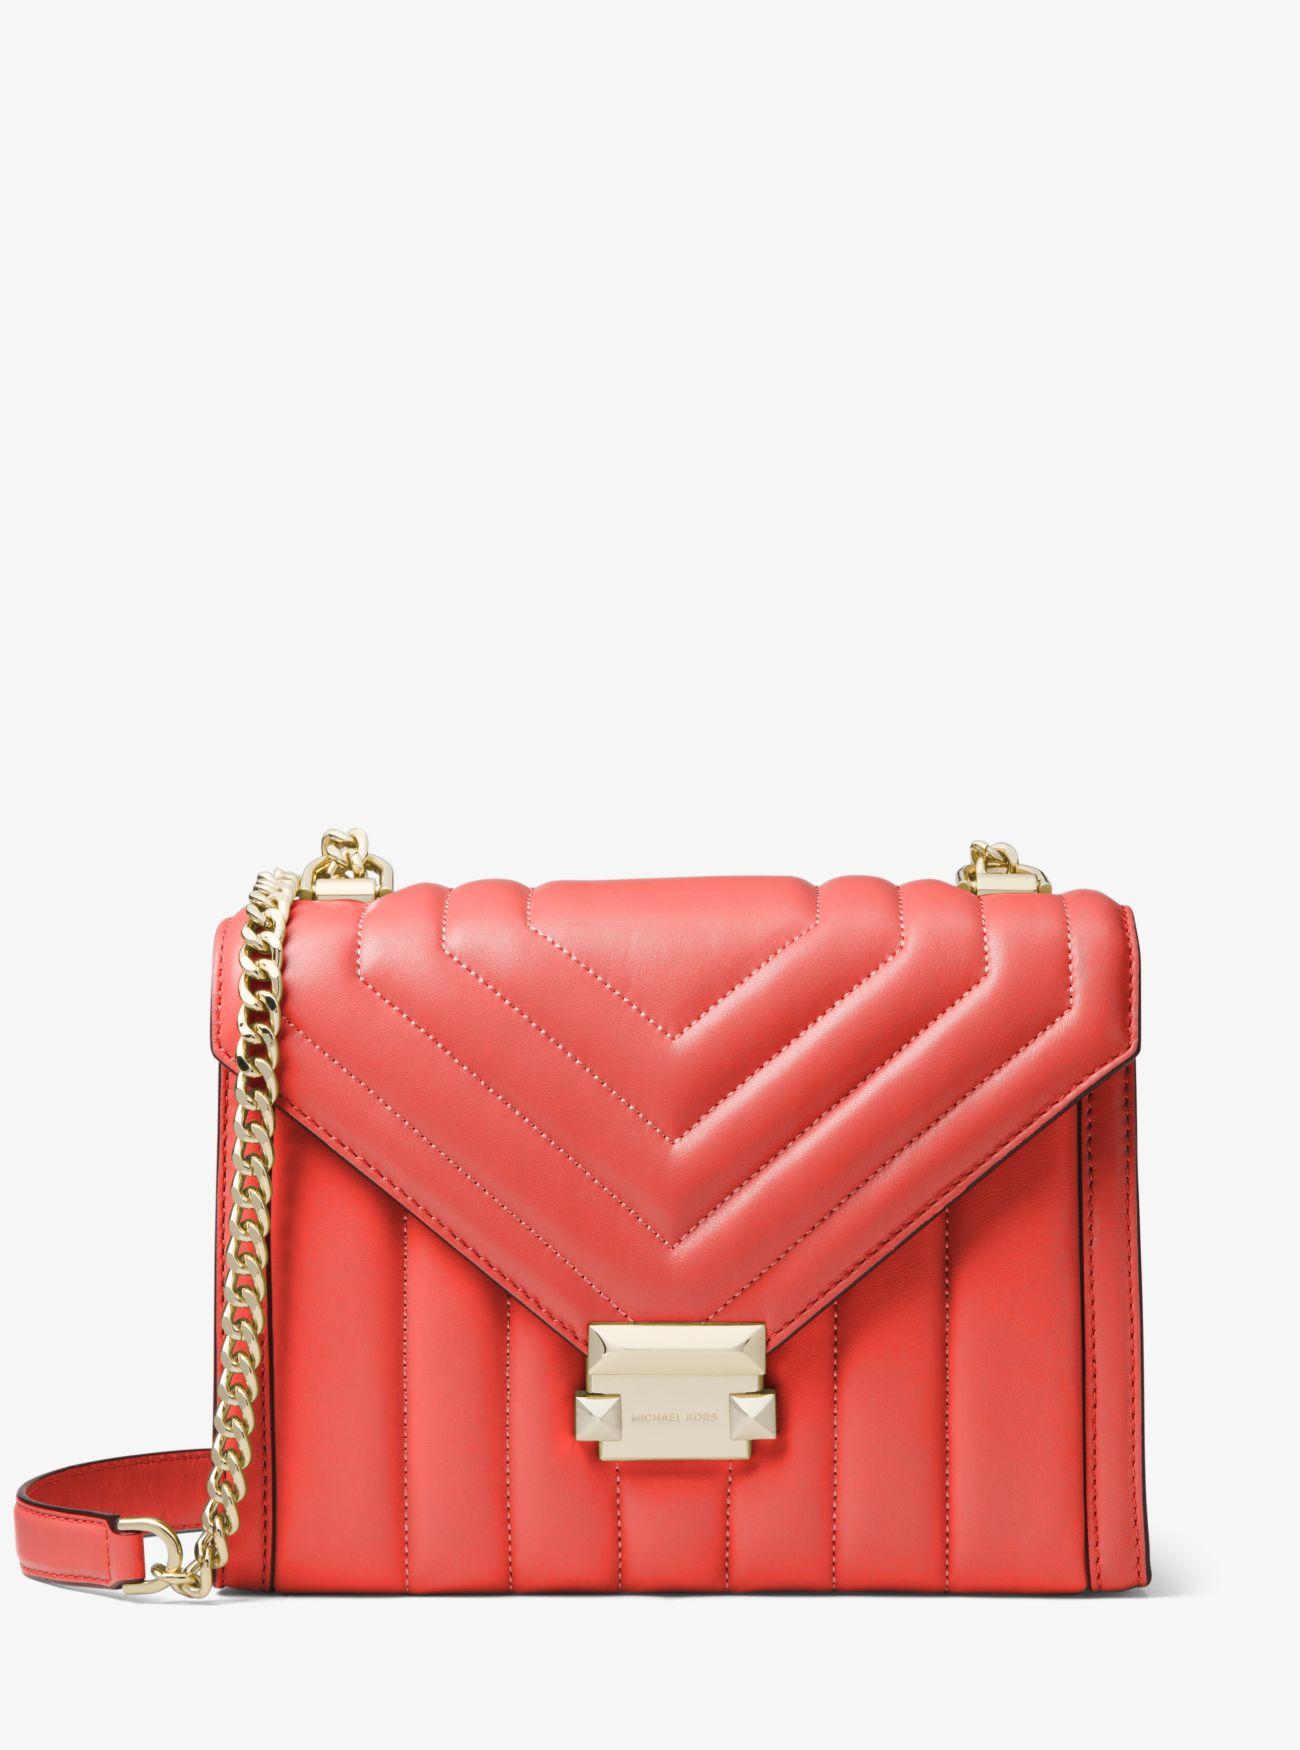 MICHAEL Michael Kors Whitney Large Quilted Leather Convertible Shoulder Bag in Pink - Lyst